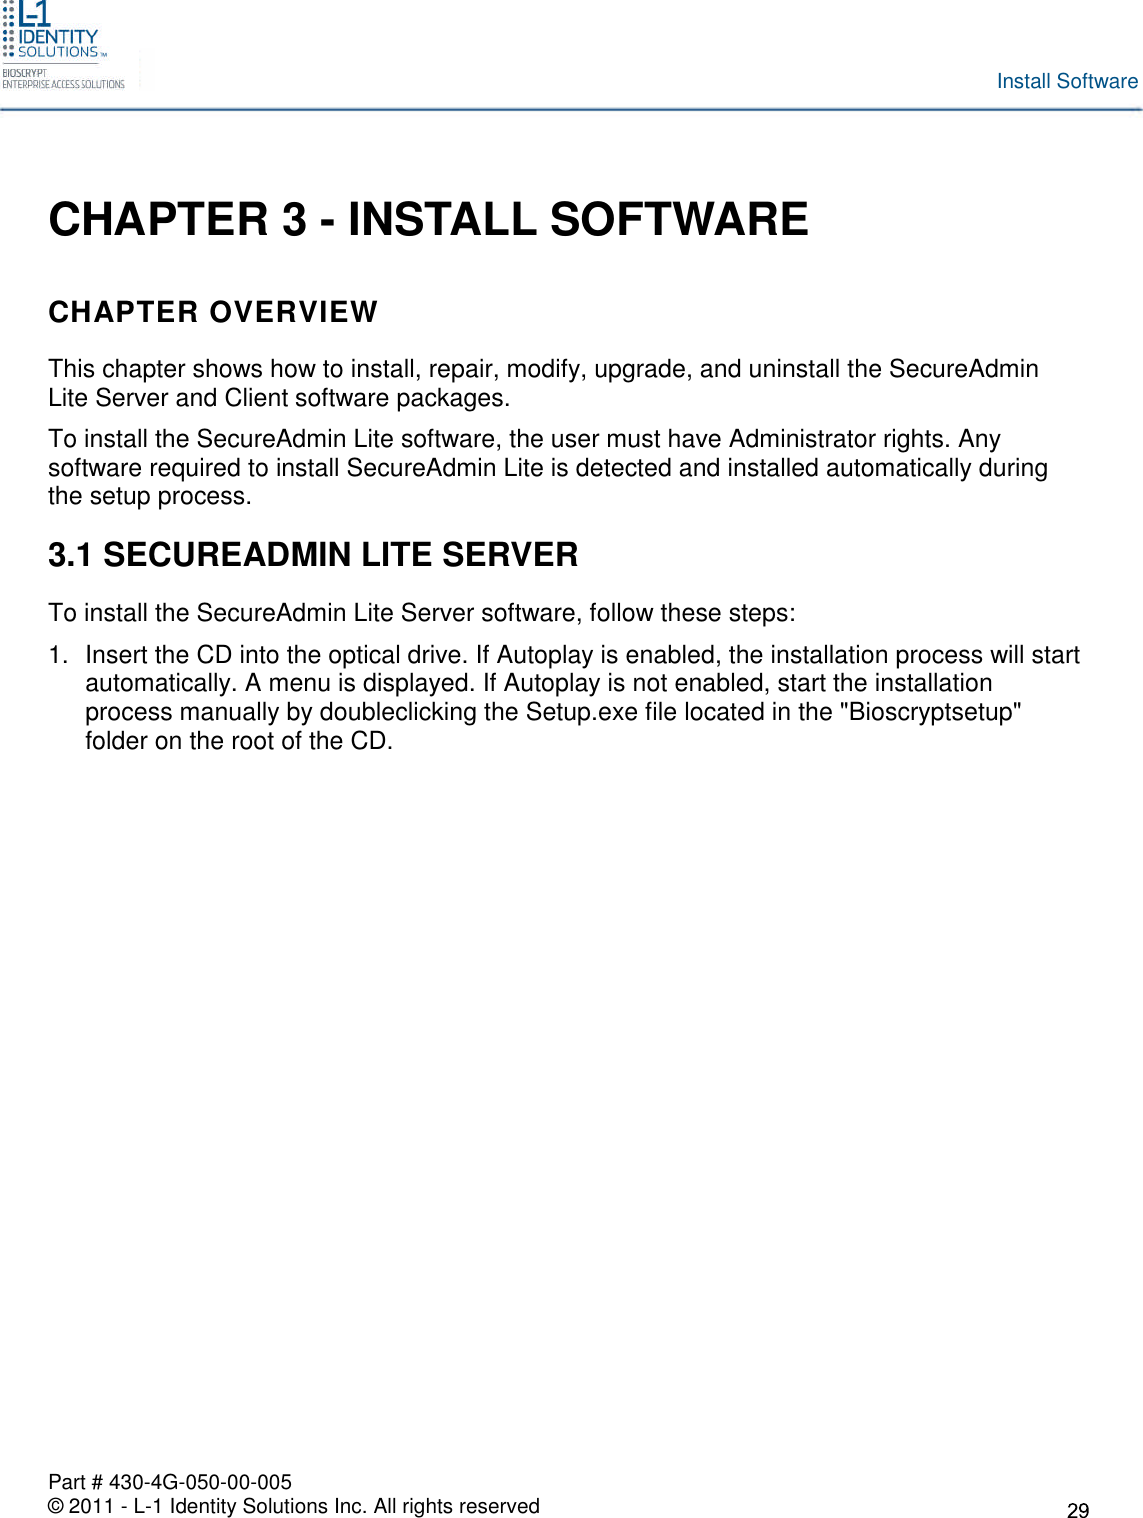 Part # 430-4G-050-00-005© 2011 - L-1 Identity Solutions Inc. All rights reservedInstall SoftwareCHAPTER 3 - INSTALL SOFTWARECHAPTER OVERVIEWThis chapter shows how to install, repair, modify, upgrade, and uninstall the SecureAdminLite Server and Client software packages.To install the SecureAdmin Lite software, the user must have Administrator rights. Anysoftware required to install SecureAdmin Lite is detected and installed automatically duringthe setup process.3.1 SECUREADMIN LITE SERVERTo install the SecureAdmin Lite Server software, follow these steps:1. Insert the CD into the optical drive. If Autoplay is enabled, the installation process will startautomatically. A menu is displayed. If Autoplay is not enabled, start the installationprocess manually by doubleclicking the Setup.exe file located in the &quot;Bioscryptsetup&quot;folder on the root of the CD.